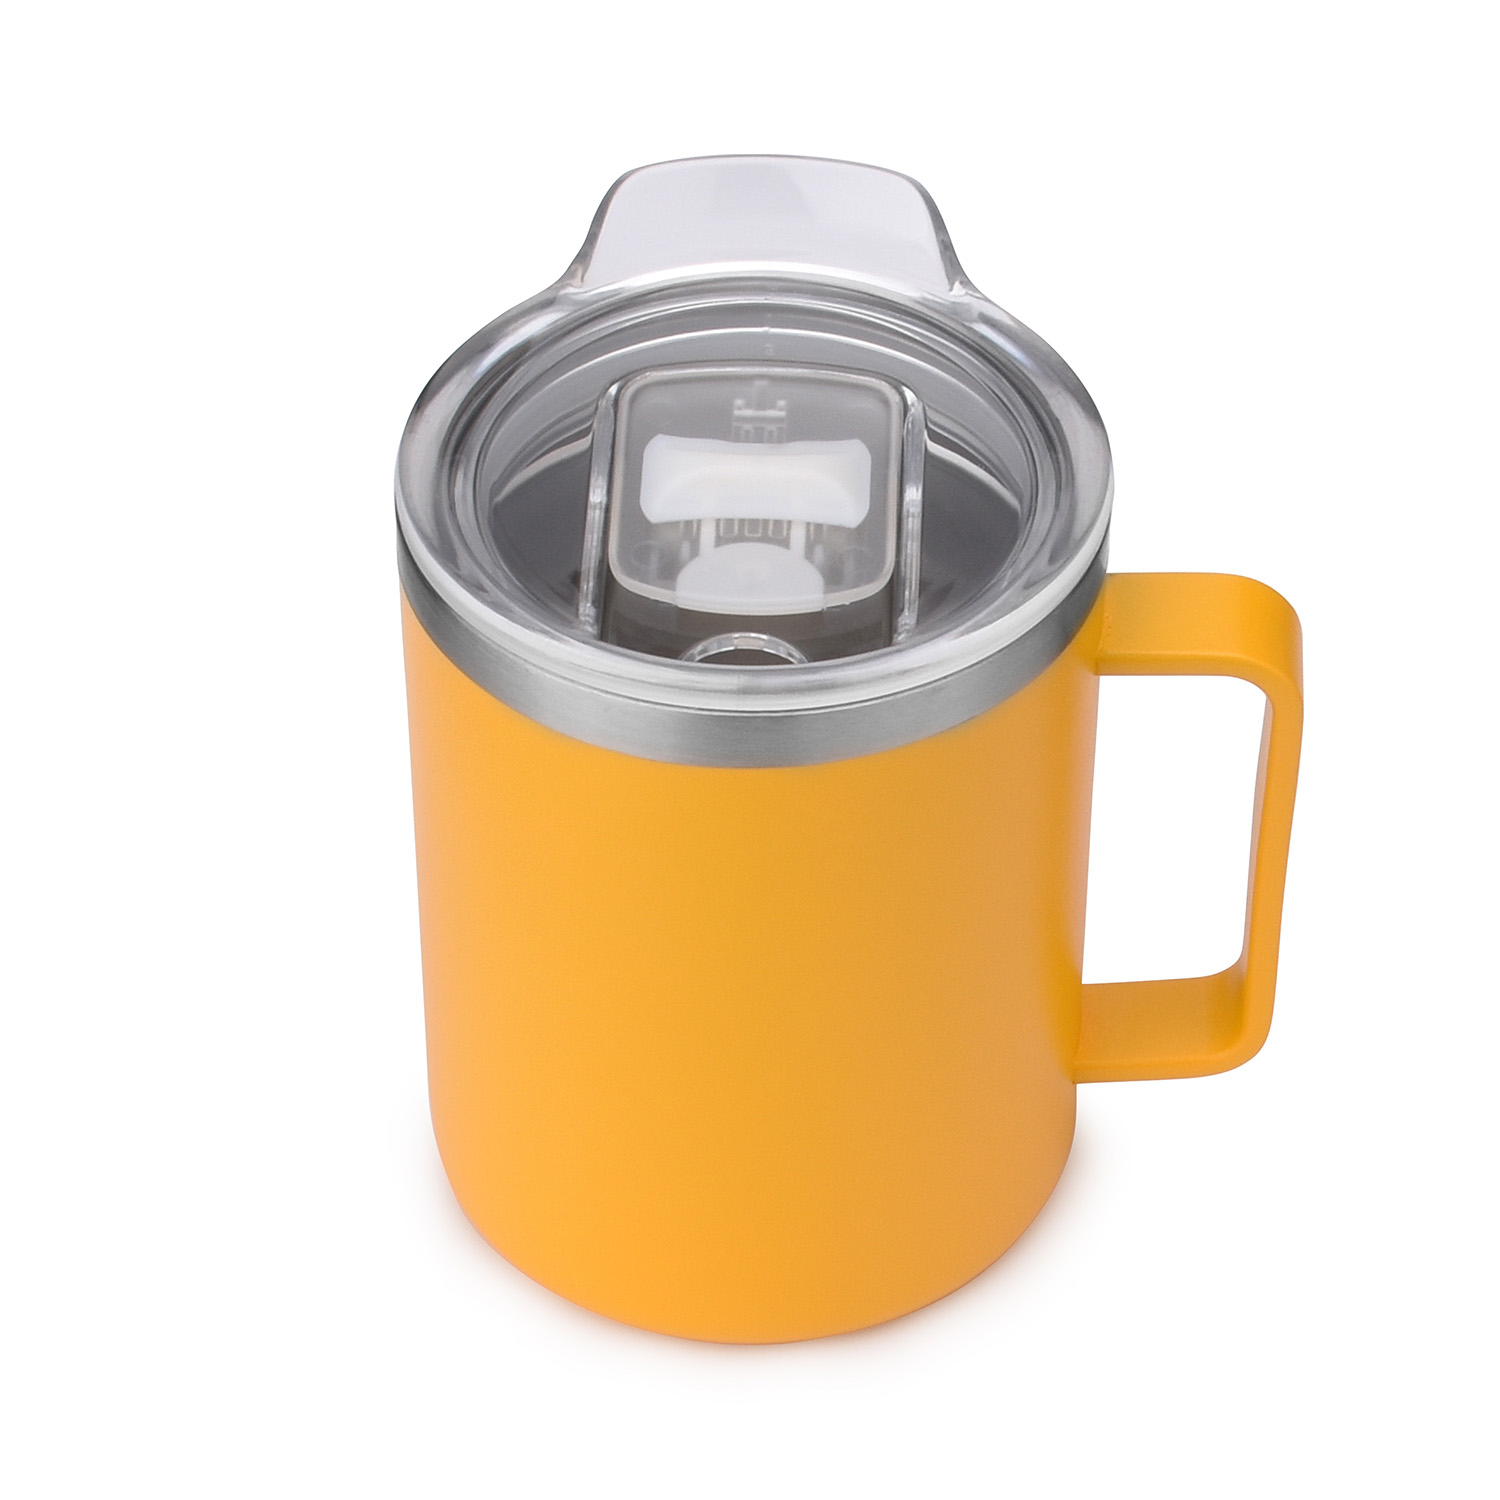 https://www.waterbottle.tech/wp-content/uploads/2019/10/insulated-stainless-steel-mug-with-handle-and-clear-lid-s6112f1-2.jpg